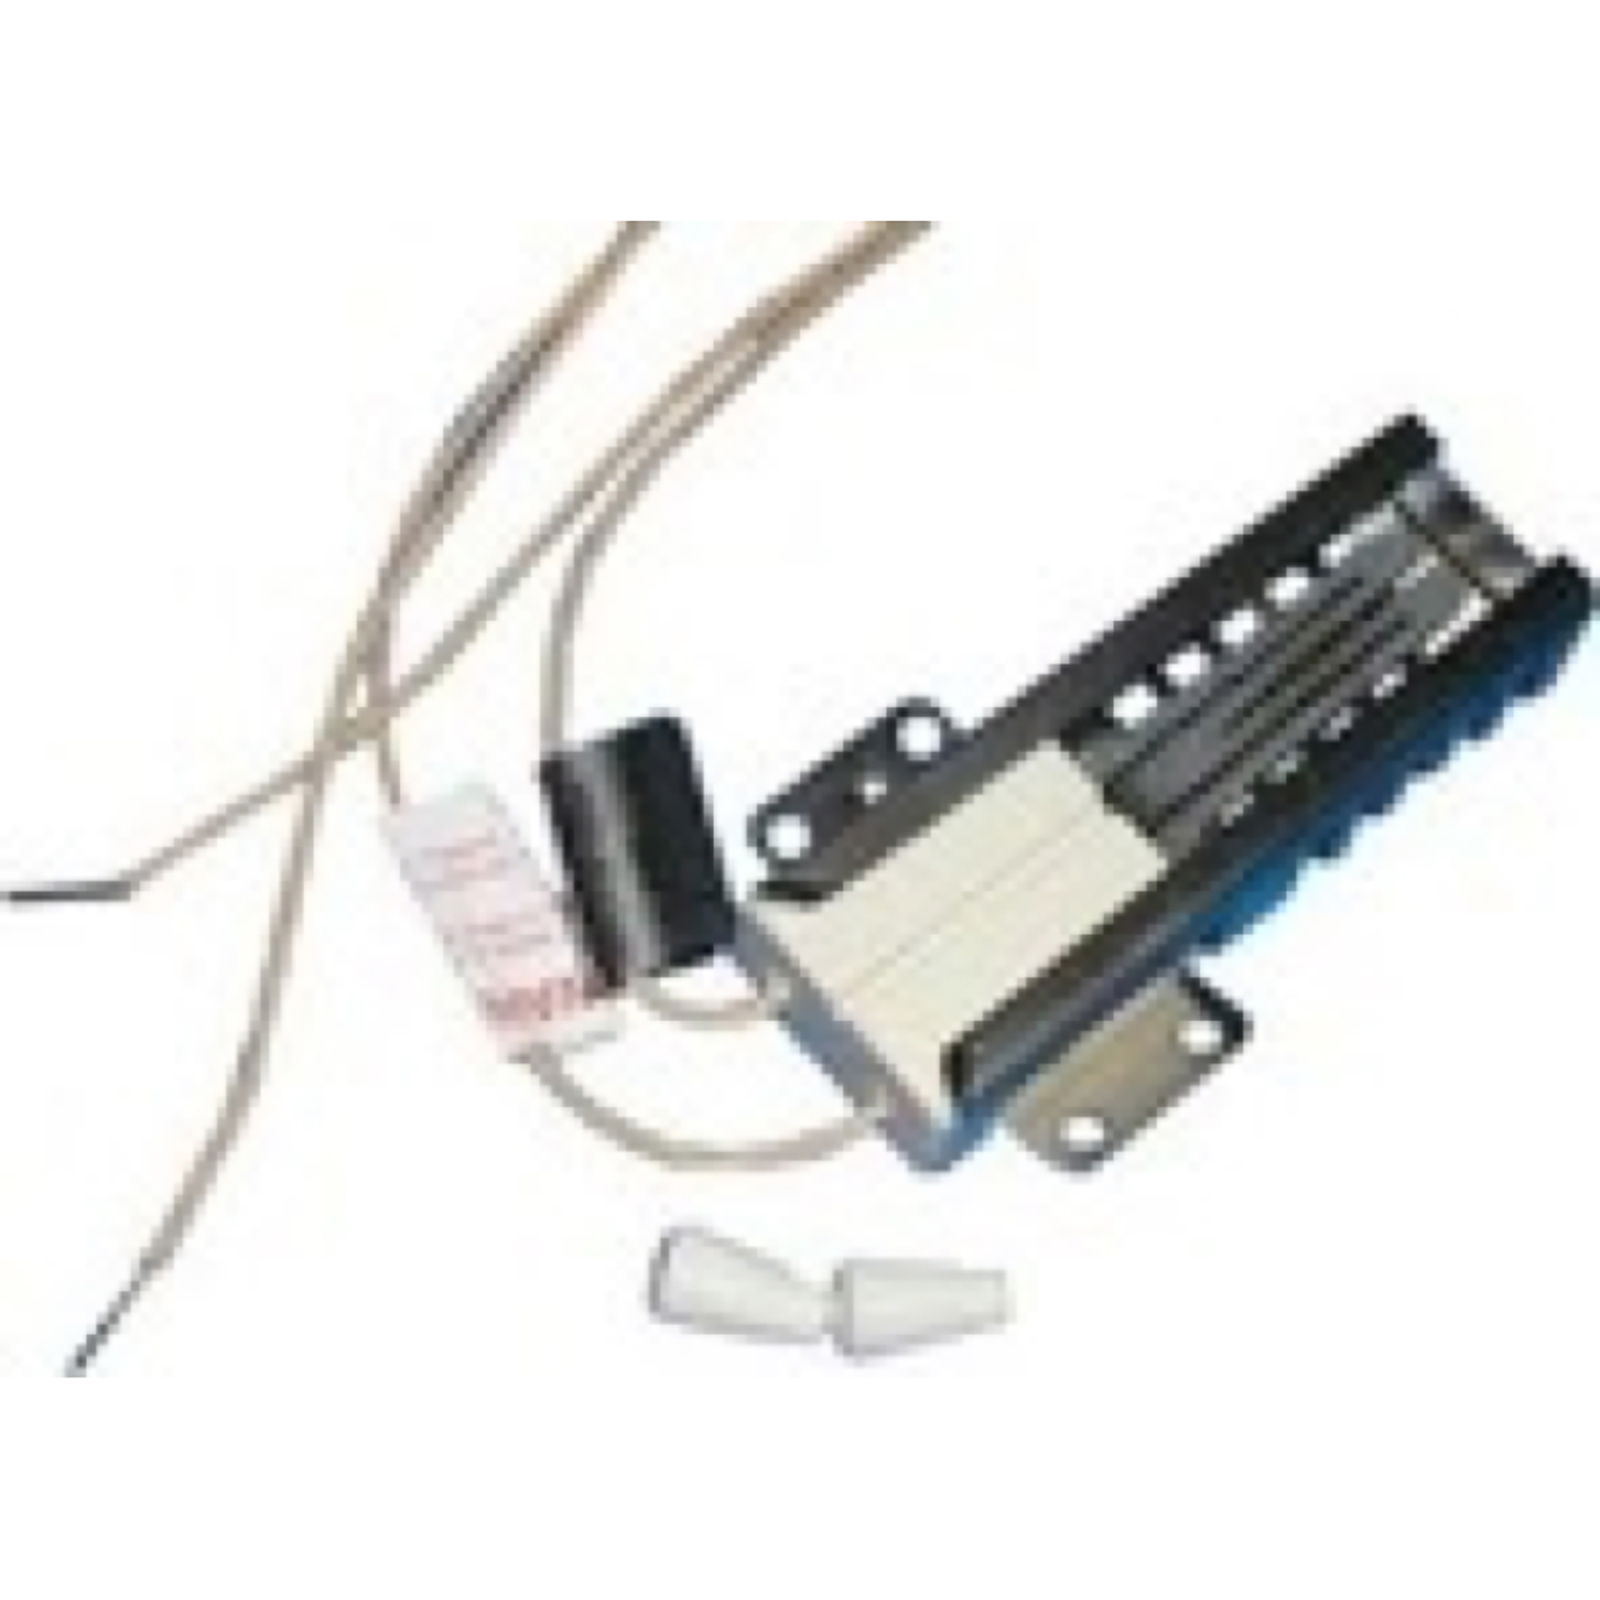 EDGEWATER PARTS WB2X9998 Ignitor for GE Ovens